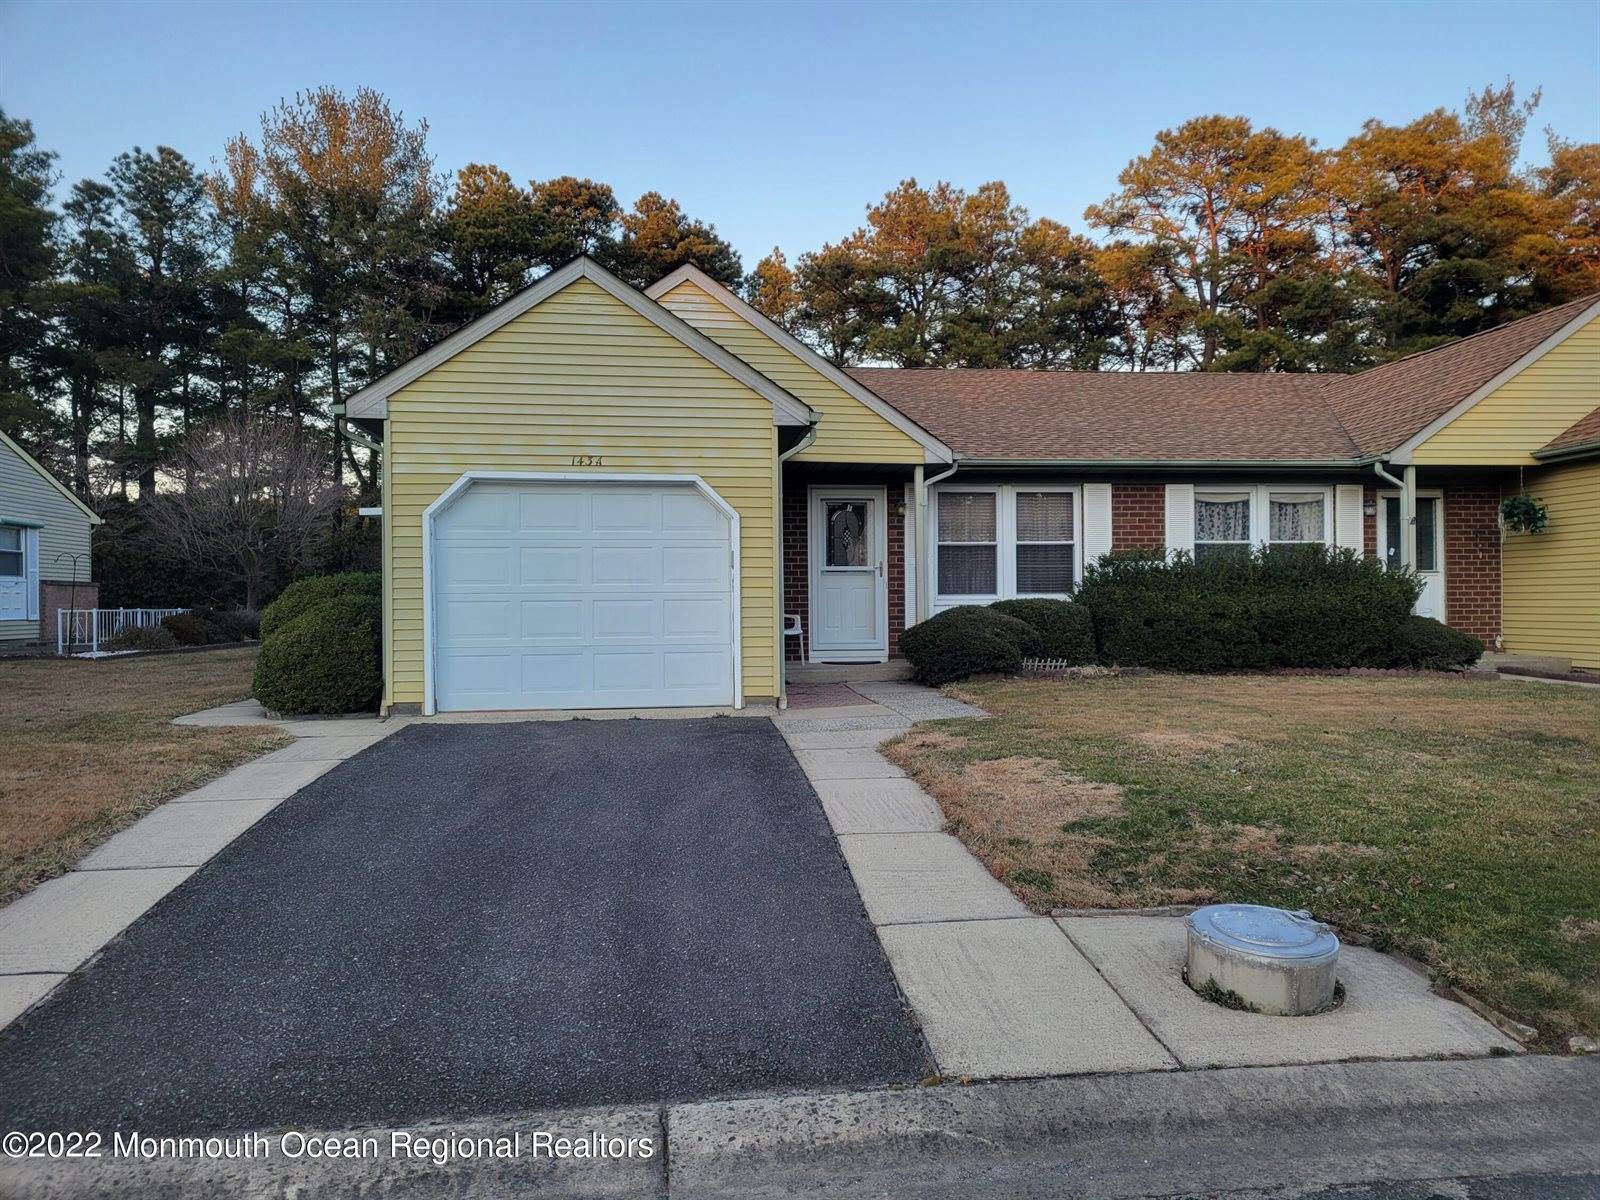 143A Sunset Road, Whiting, NJ 08759